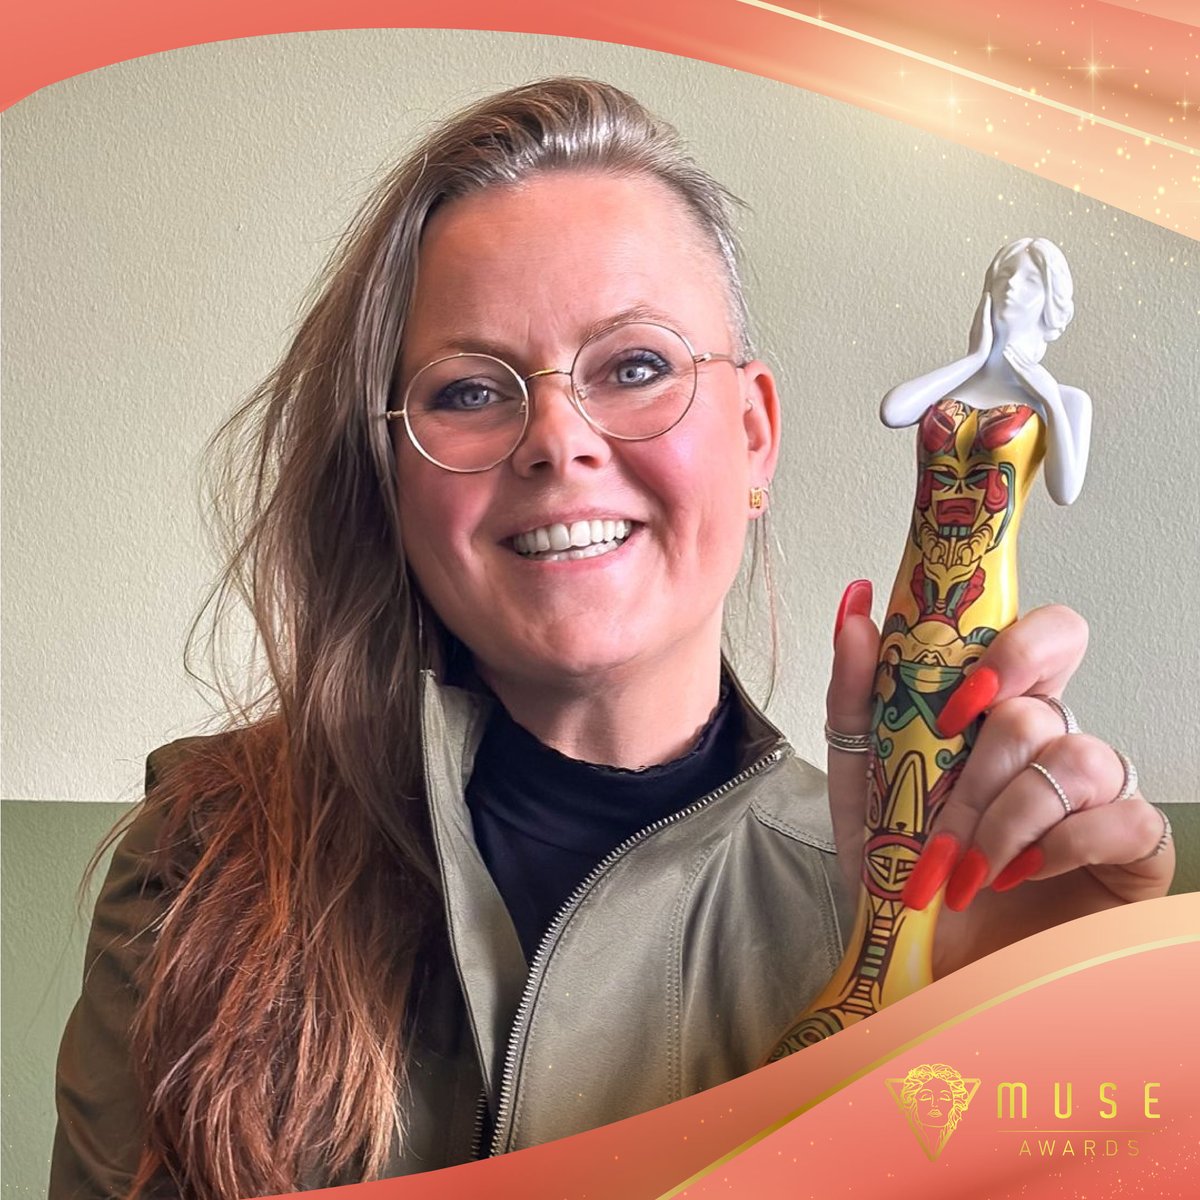 #Repost #MUSEWinners

It is great to hear such good news from Myrthe Koppelaar.
Congratulations on your well-deserved success!

Enter now!
museaward.com

#MUSE #MUSEawards #MUSECreativeAwards #creativeawards #videoawards #brandedcontent #branding #MUSEHighlight